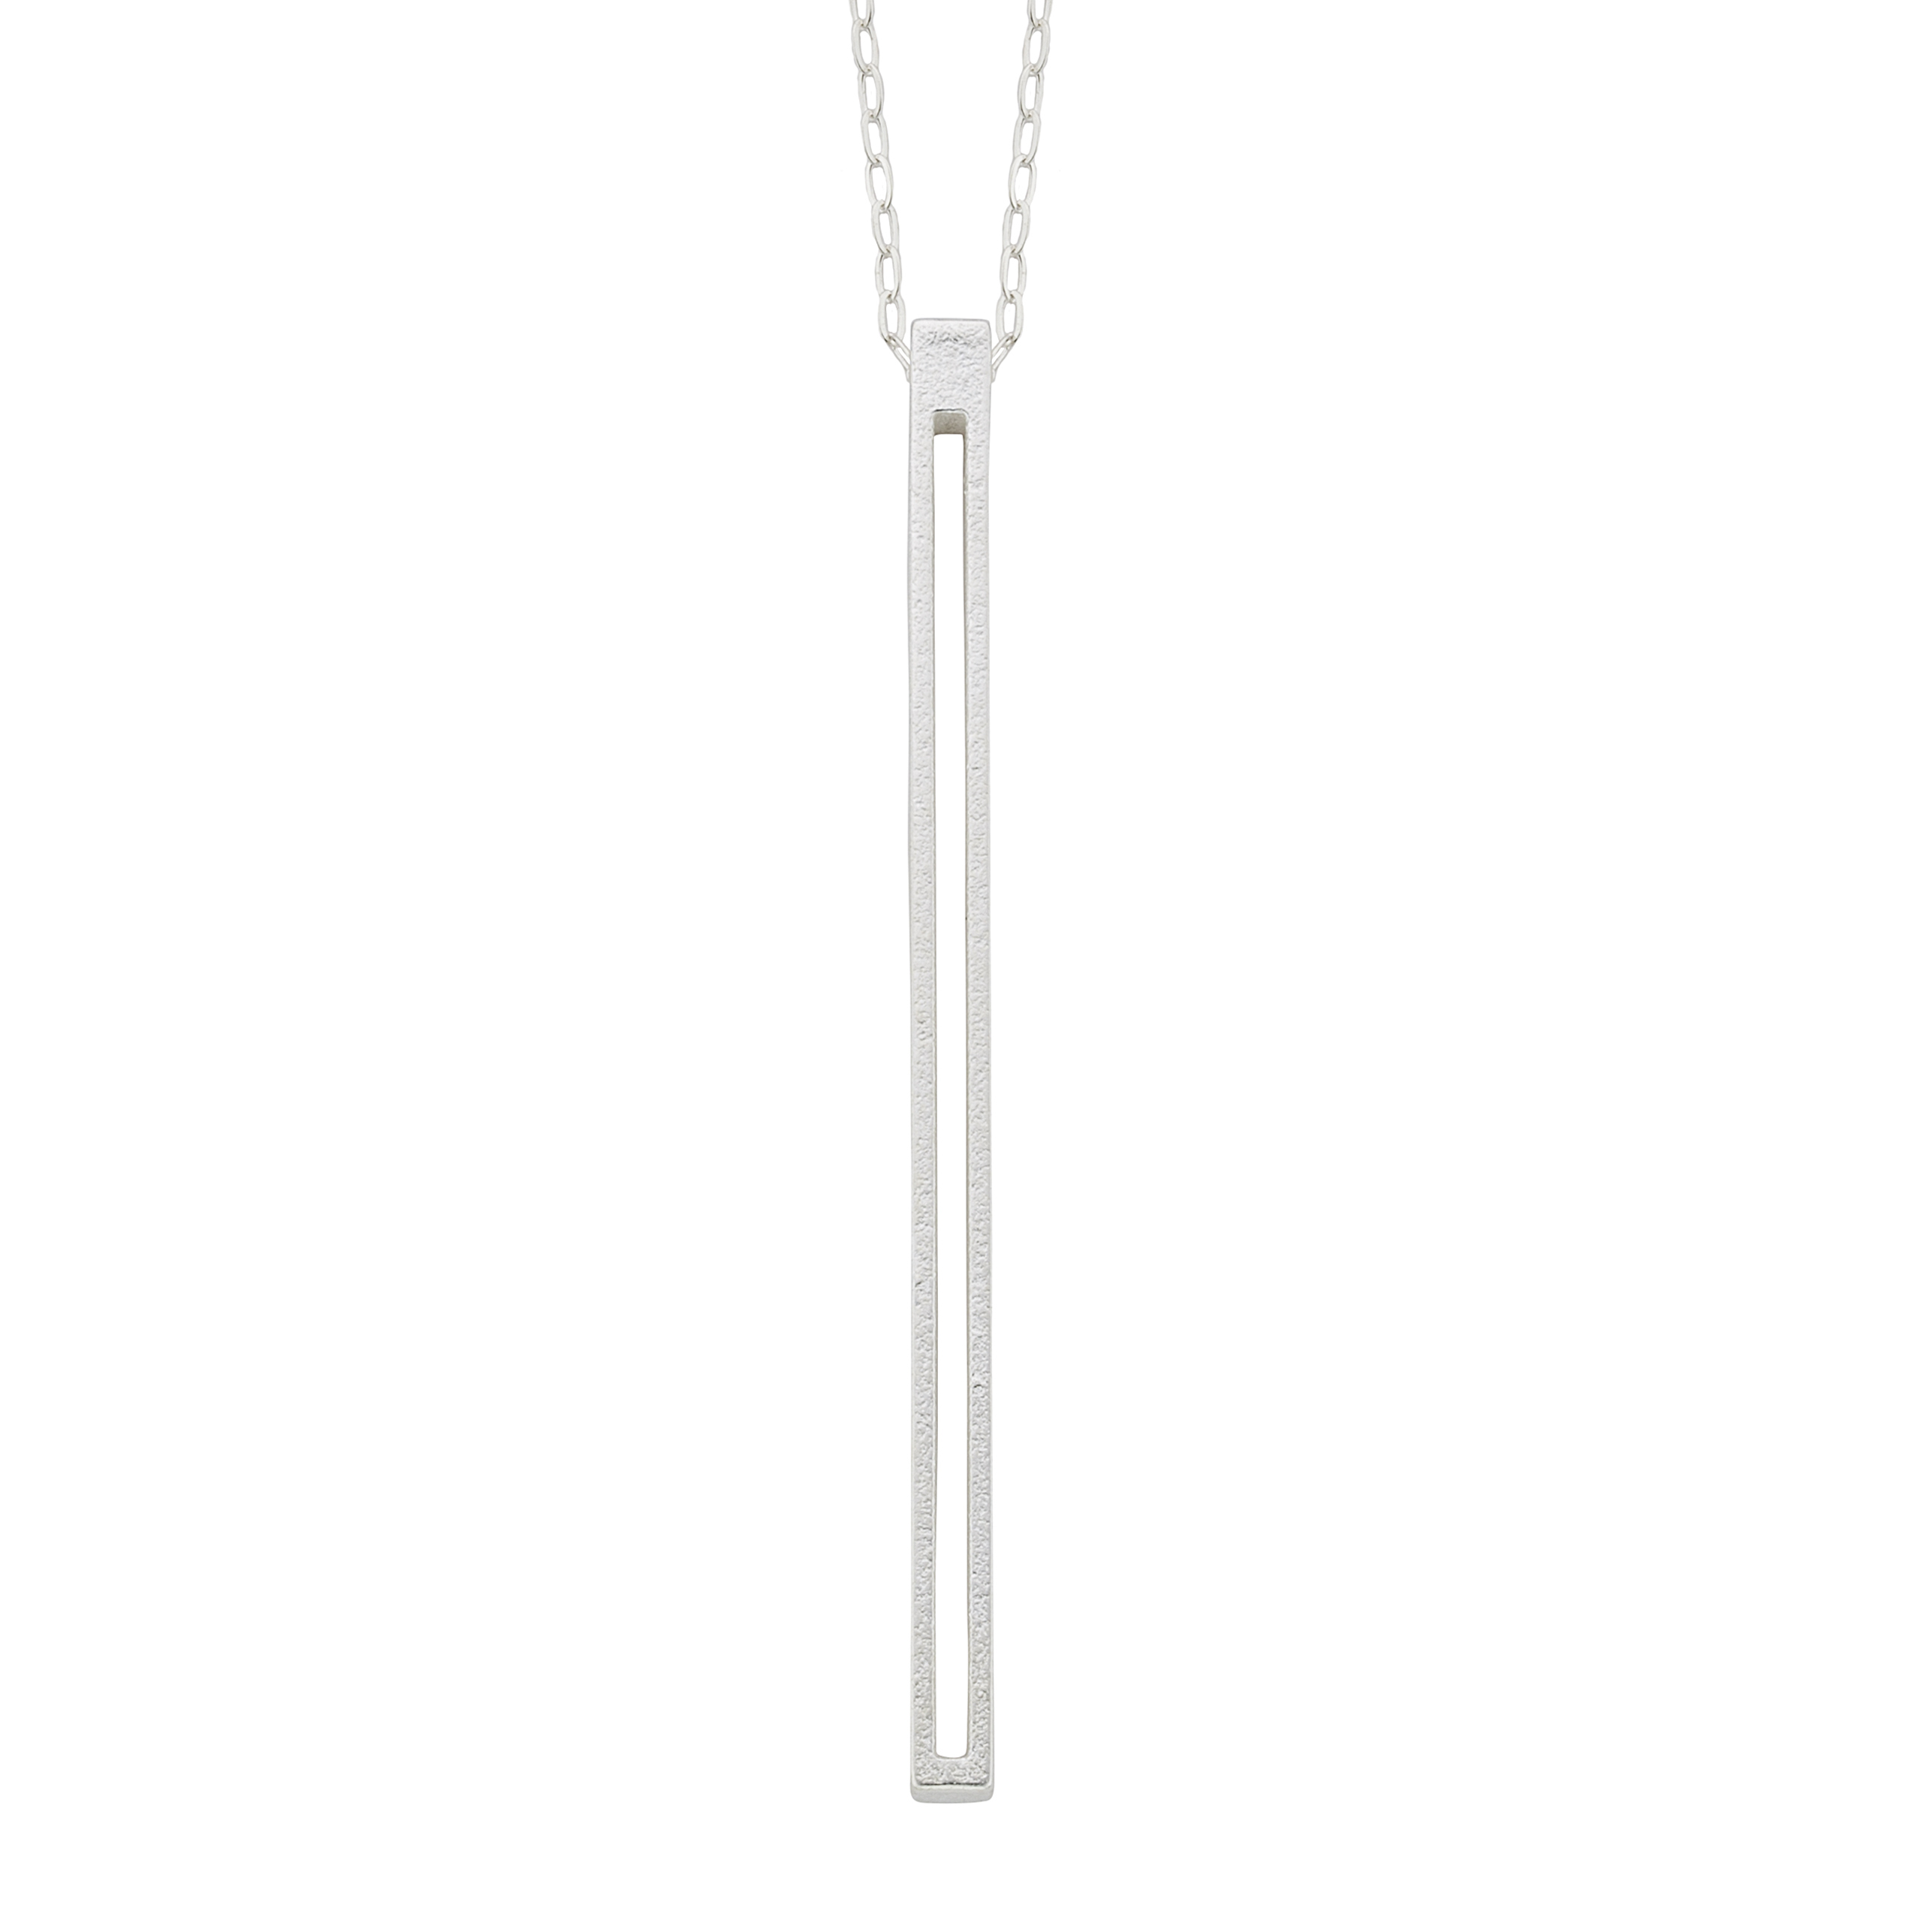 Aligned Single Bar Necklace - OLA | 3d printed jewelry